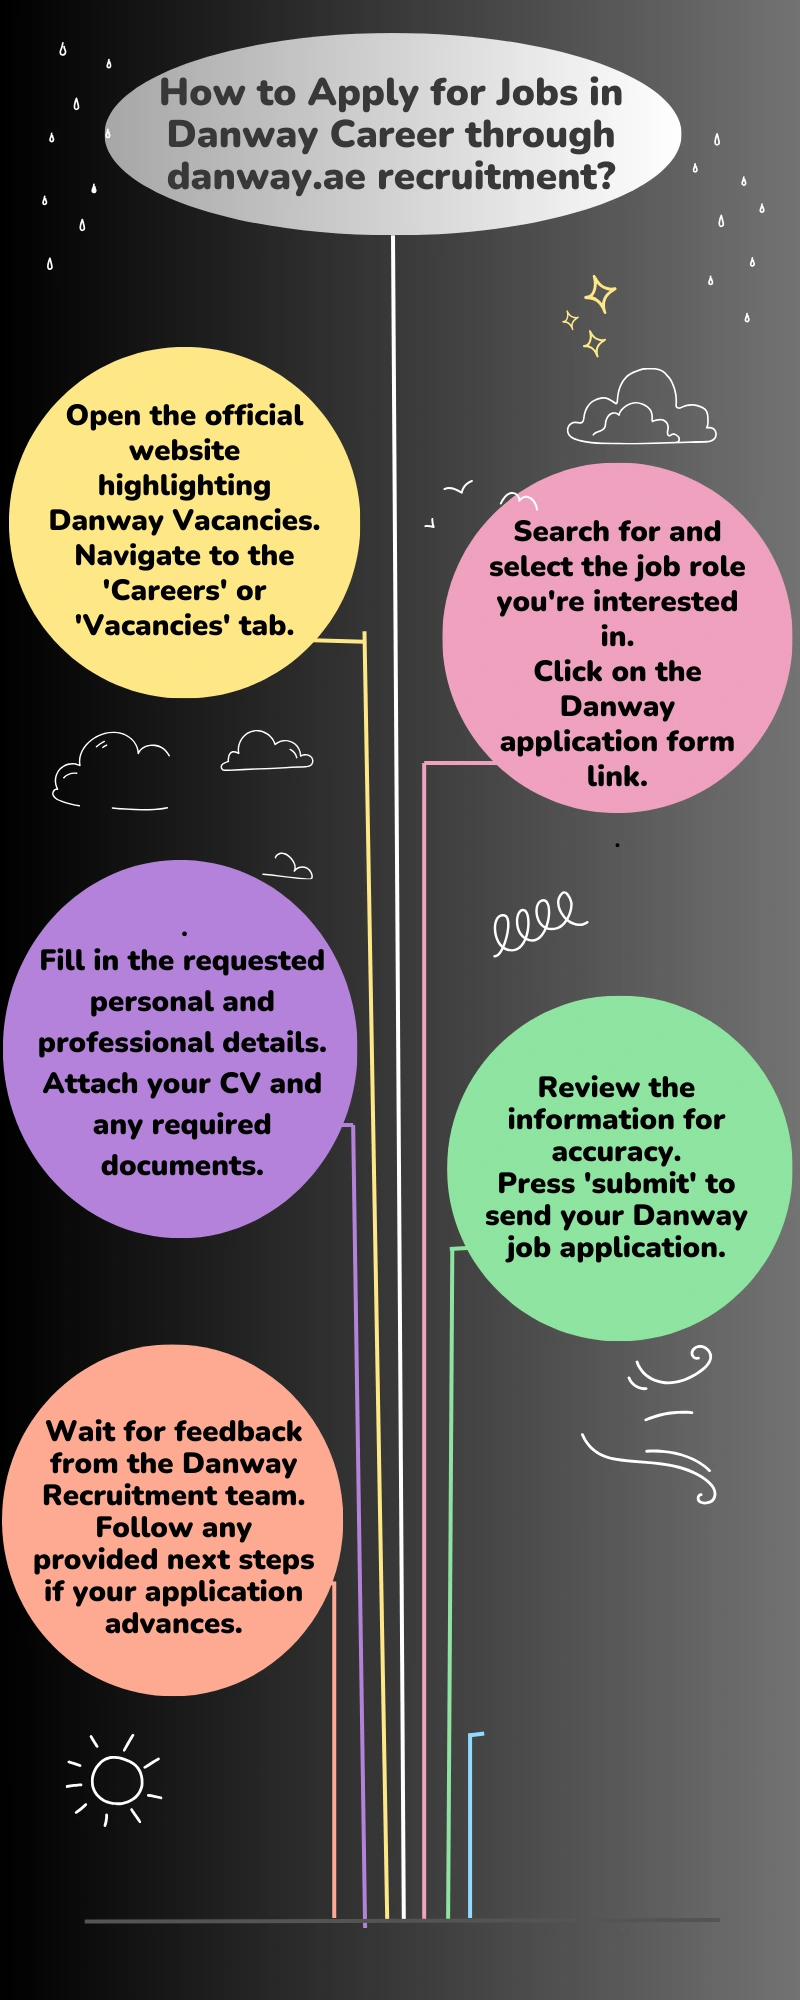 How to Apply for Jobs in Danway Career through danway.ae recruitment?